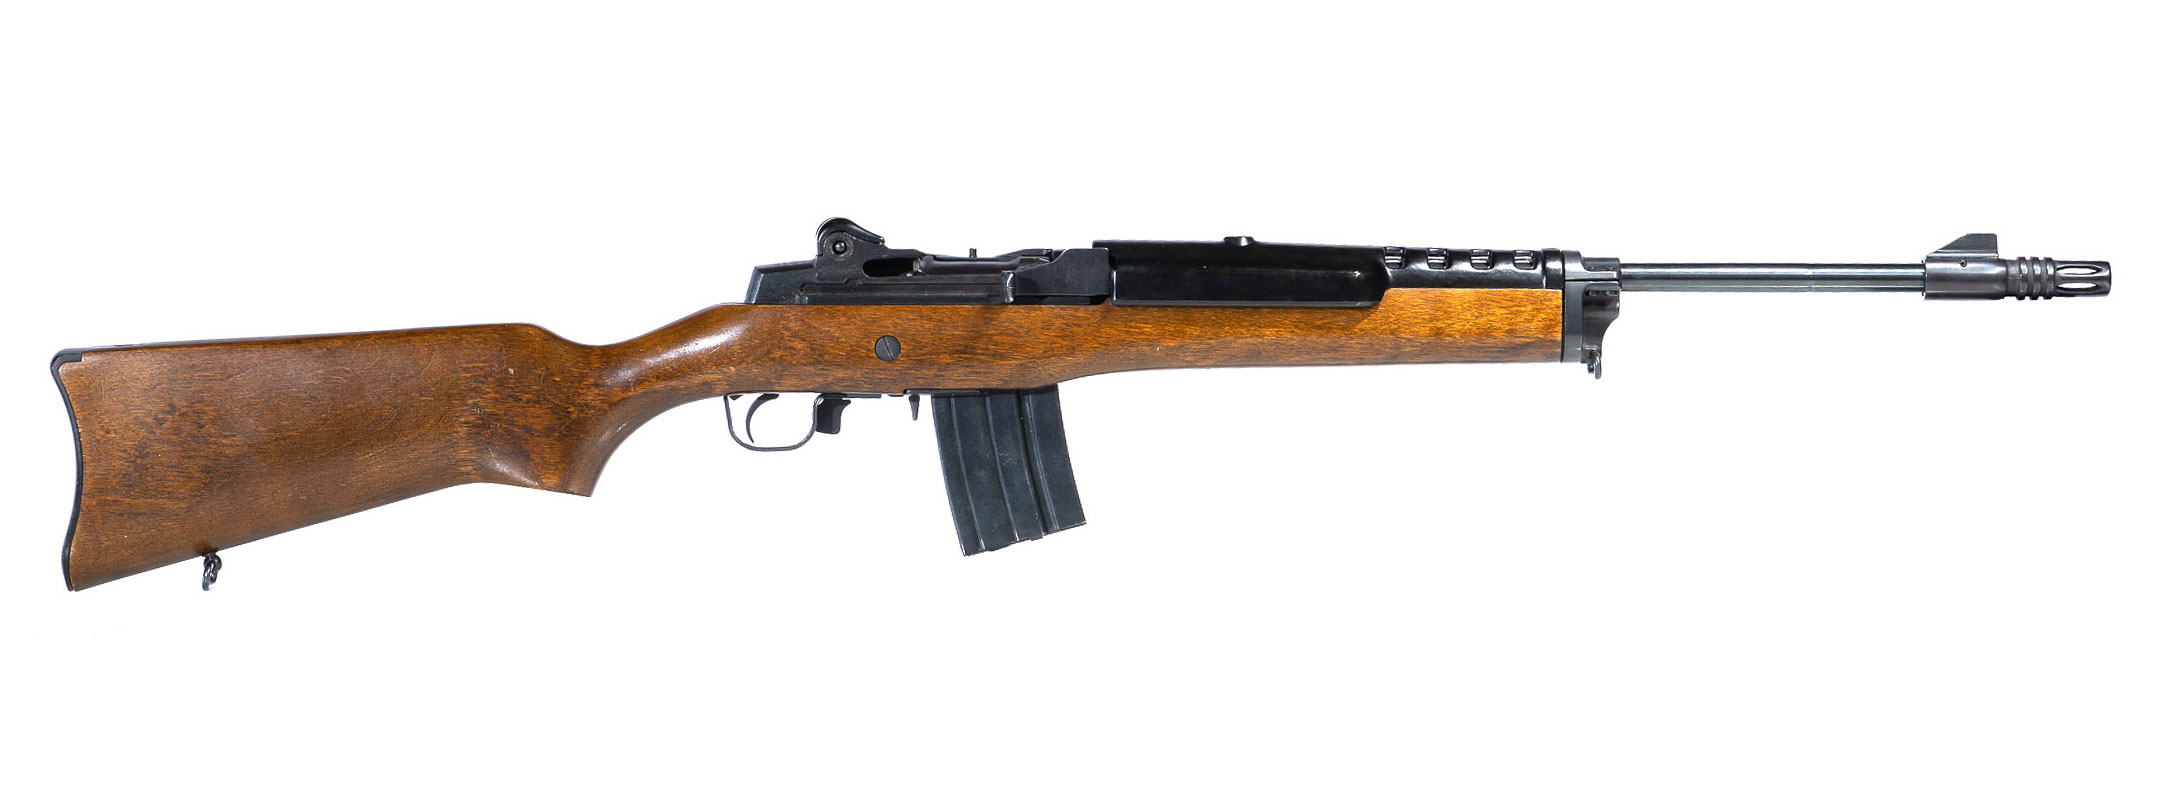 Ruger Mini14 5.56x45mm Rifle (code R024)-image